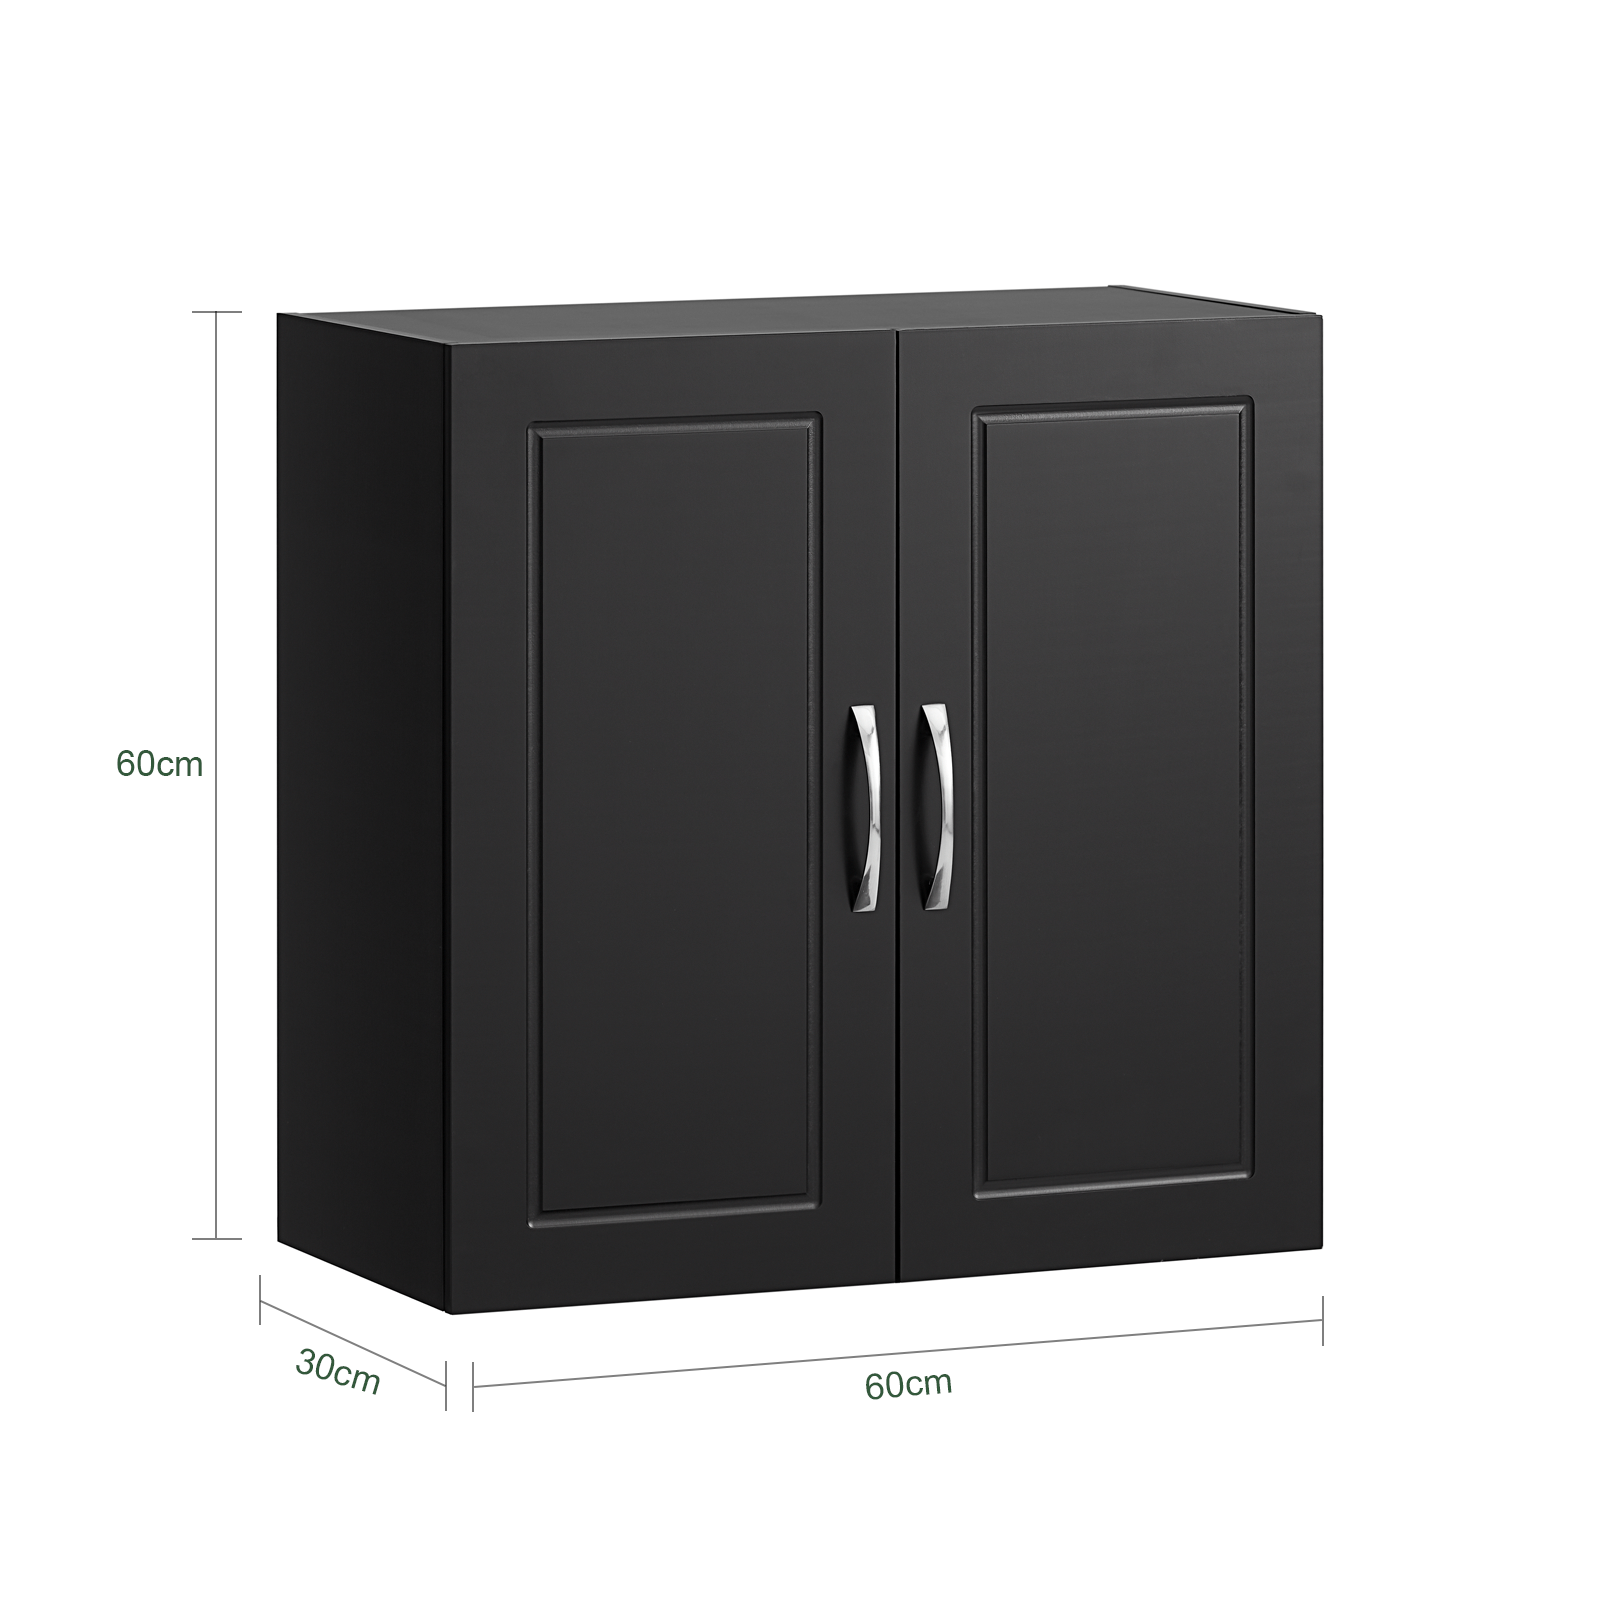 SoBuy FRG231-SCH,Wall Storage Cabinet Unit with Double Doors,Kitchen Bathroom Wall Cabinet,Garage or Laundry Room Black